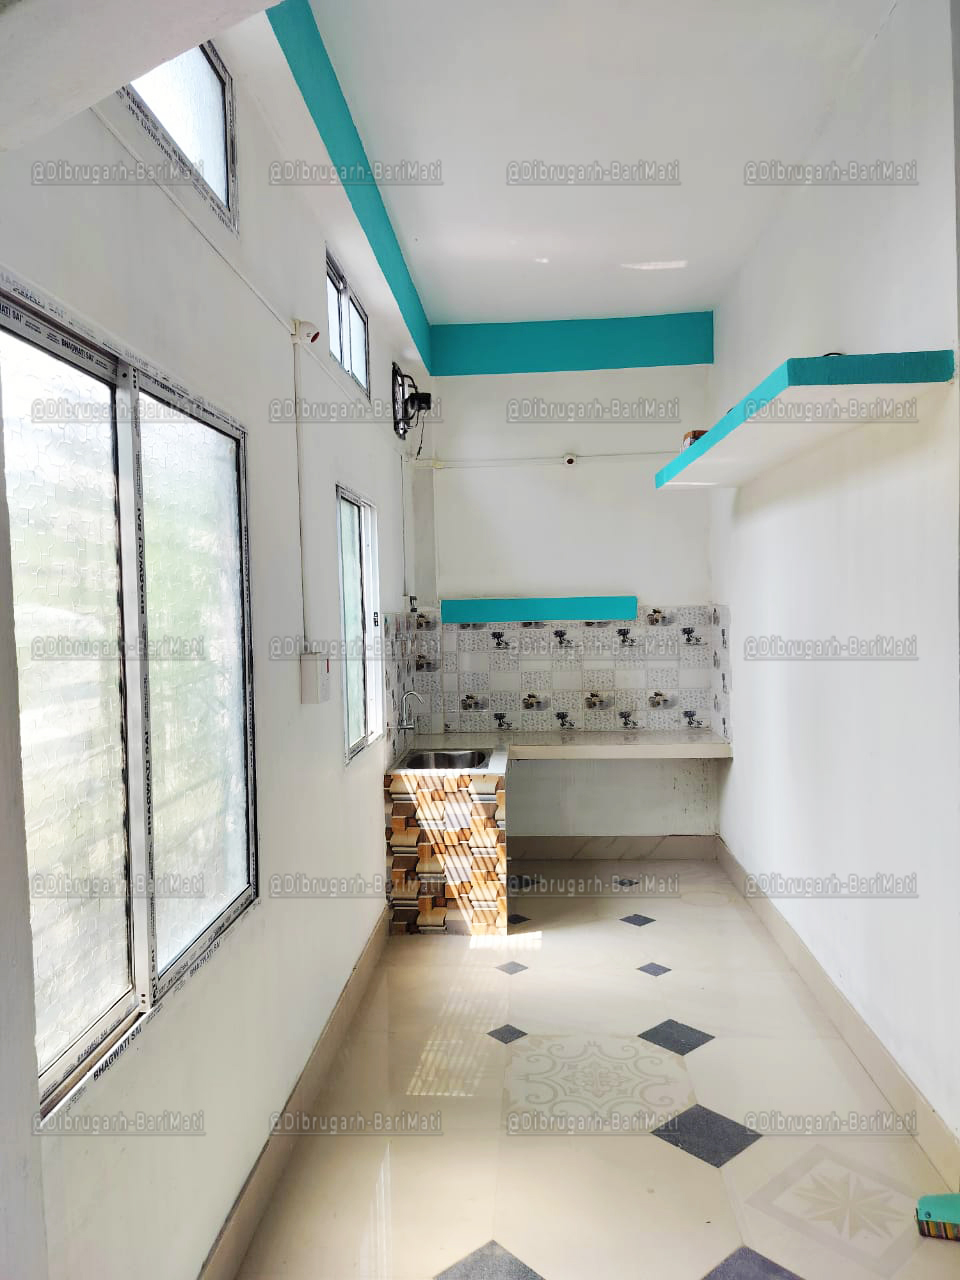 house rent under 8000 in dibrugarh at boiragimoth